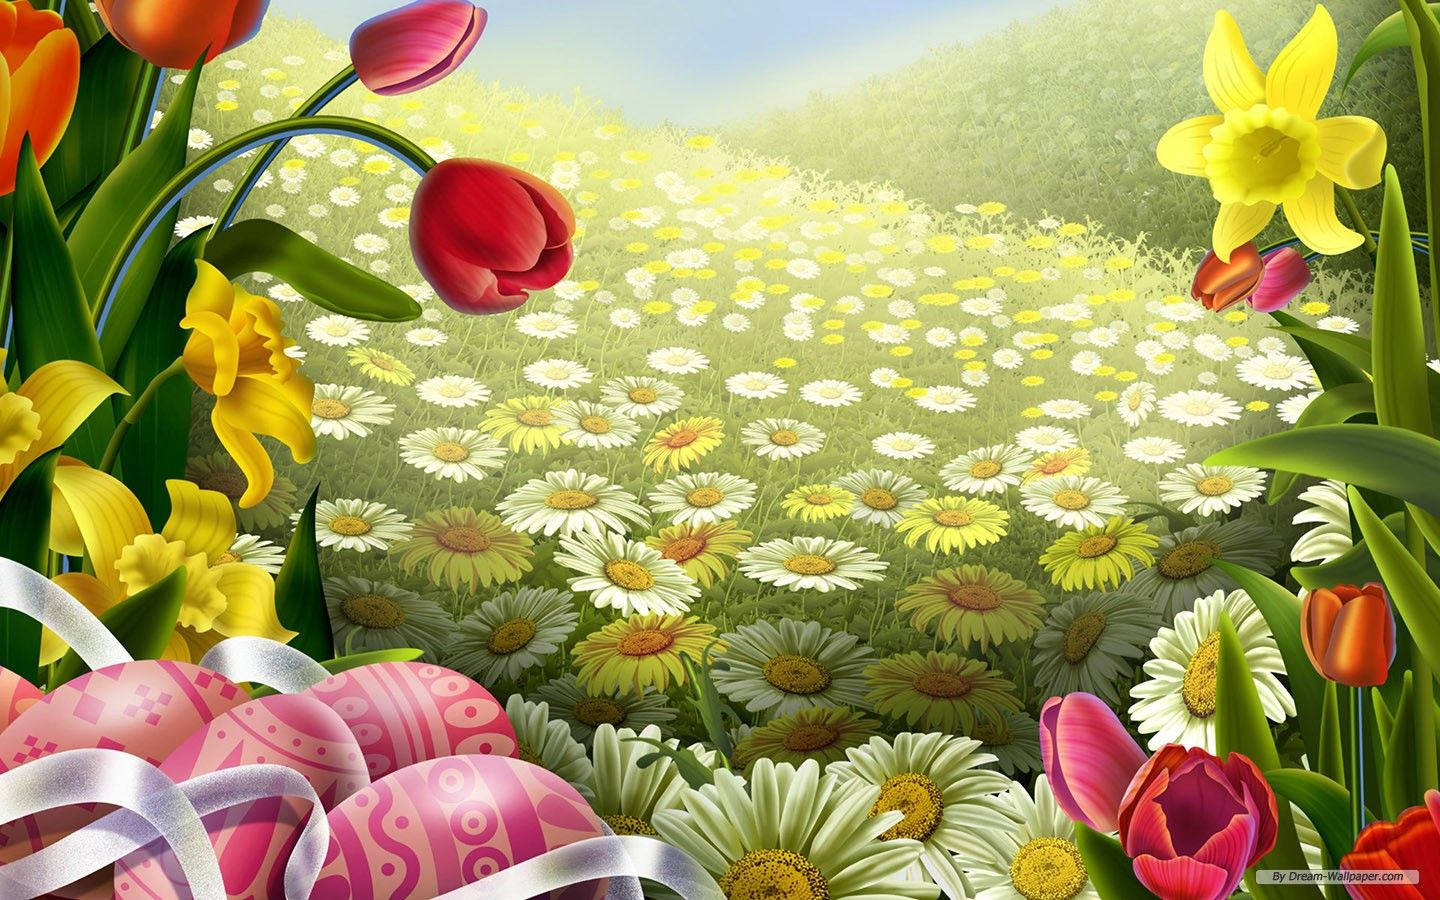 Celebrate Easter with a fun, colorful design Wallpaper